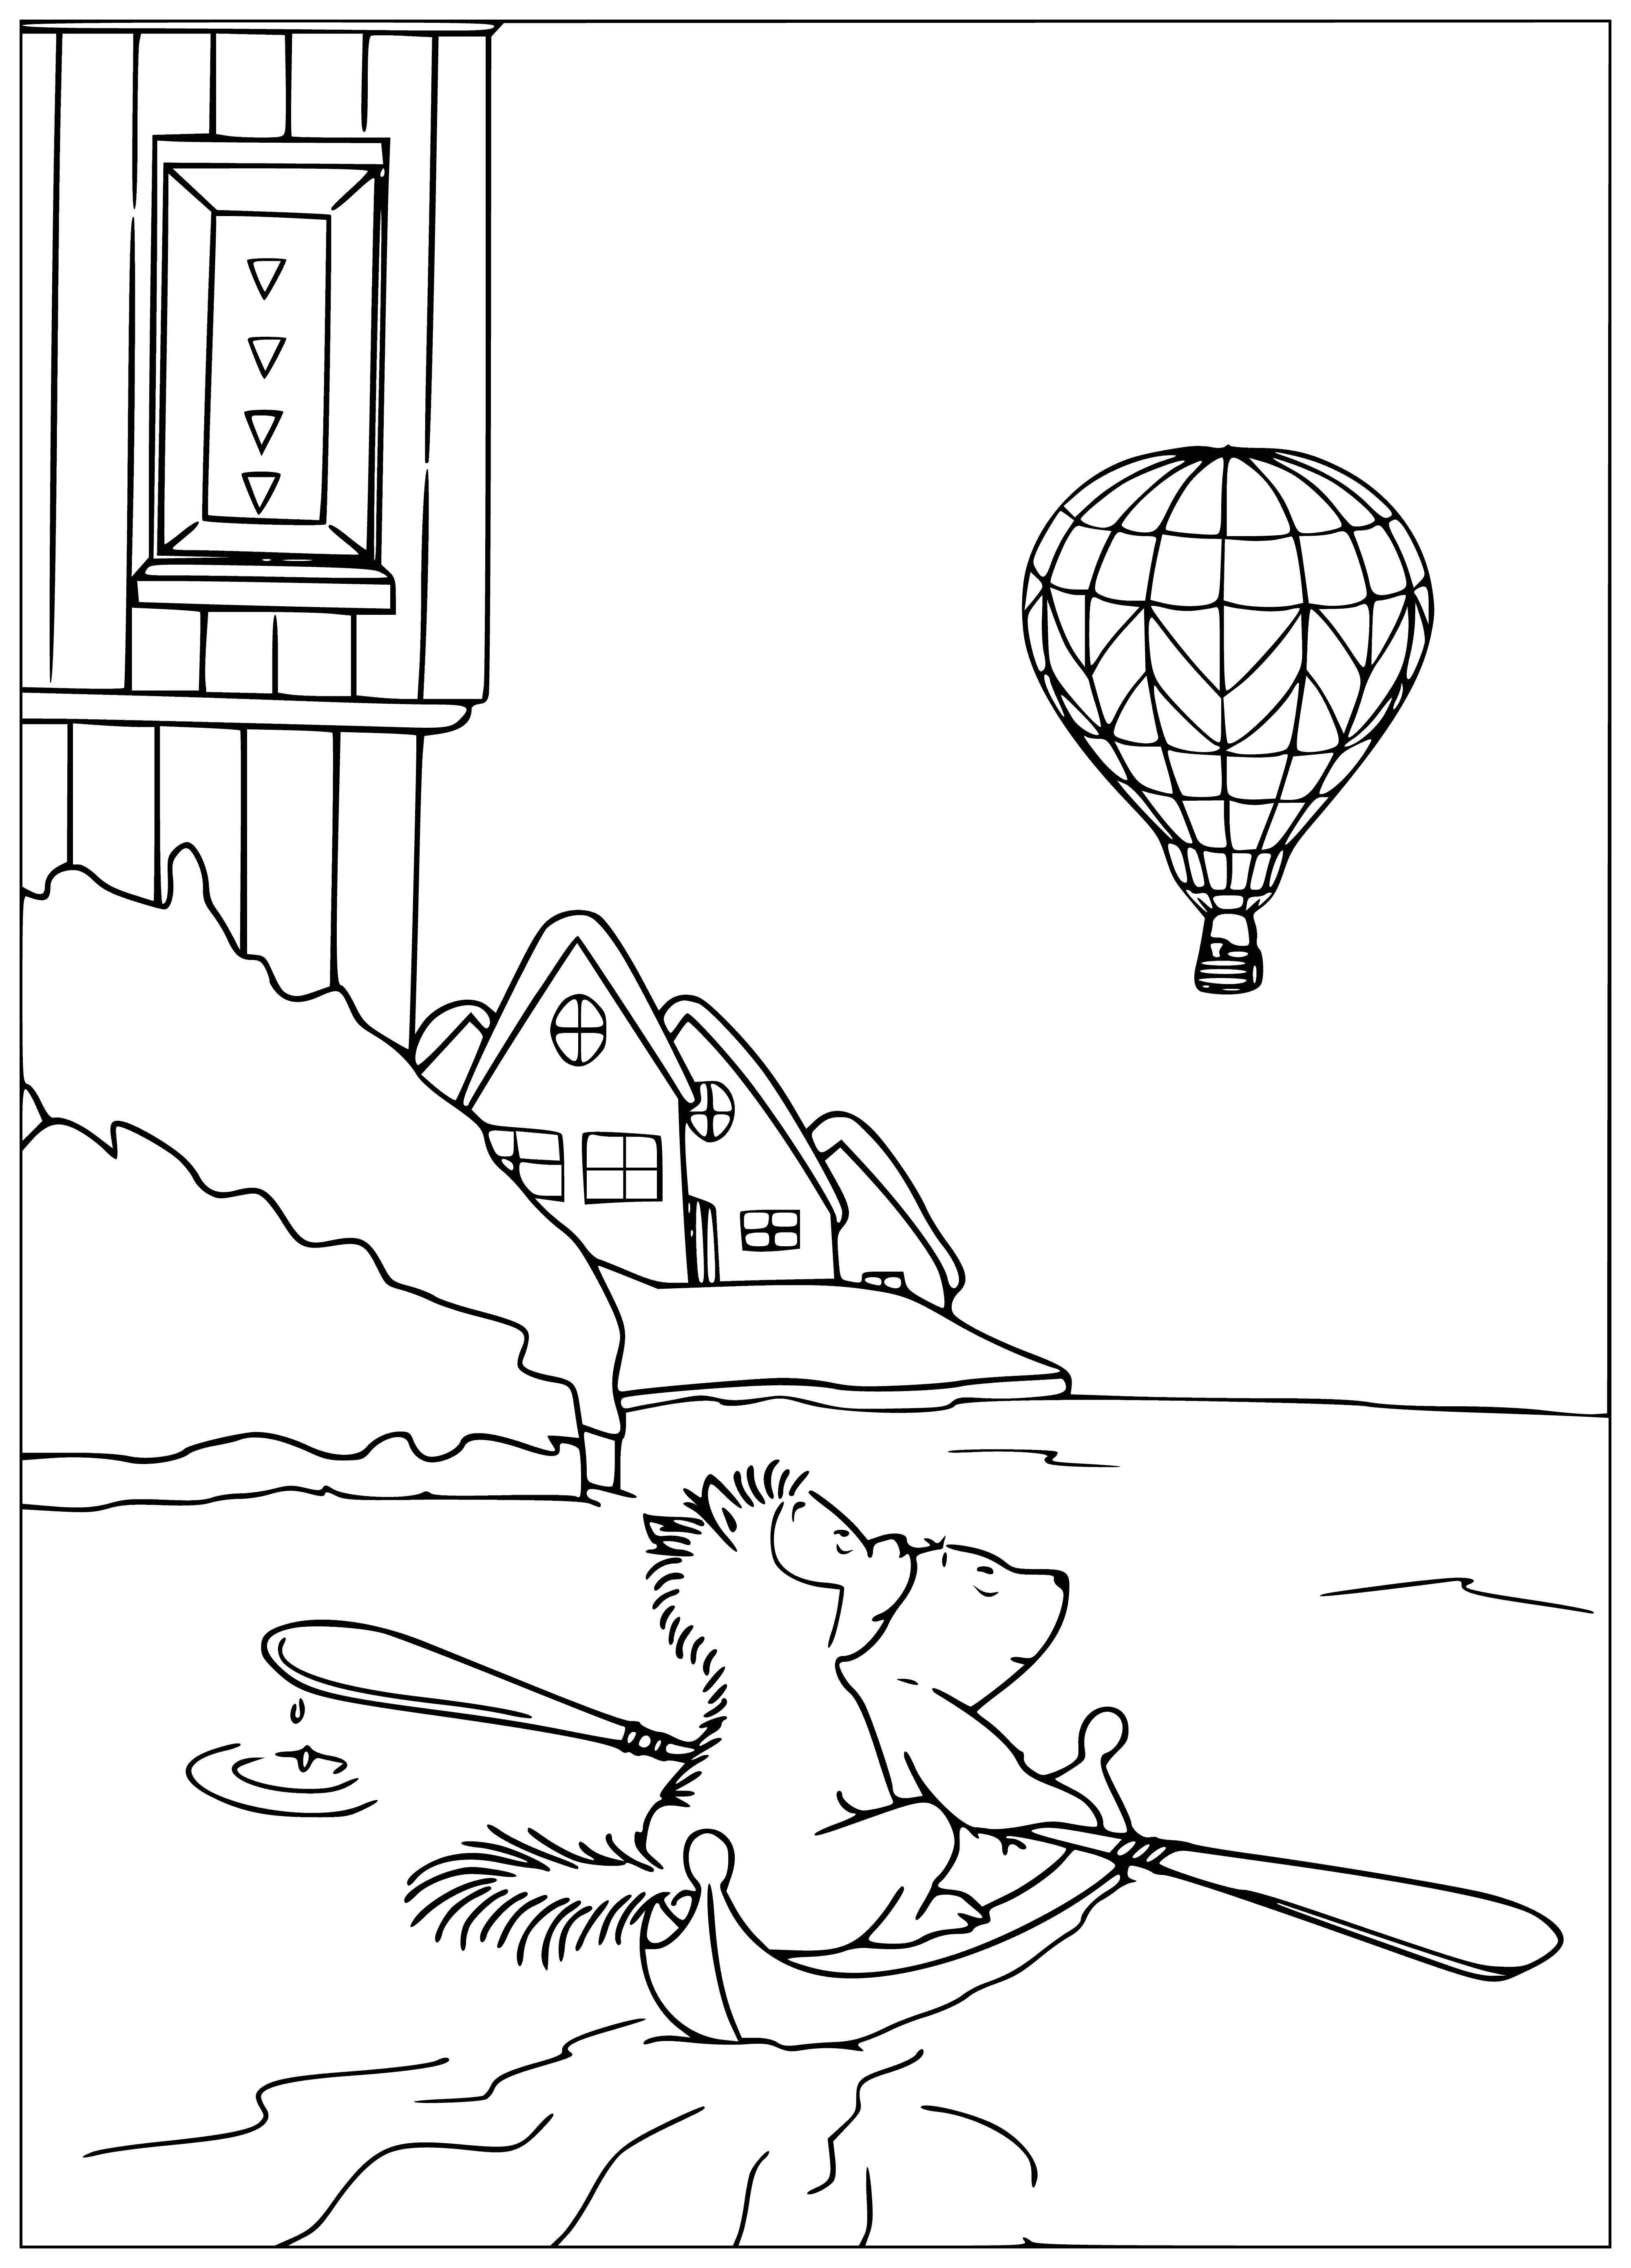 coloring page: A polar bear stands in a boat with a red life jacket in its mouth. #storytime